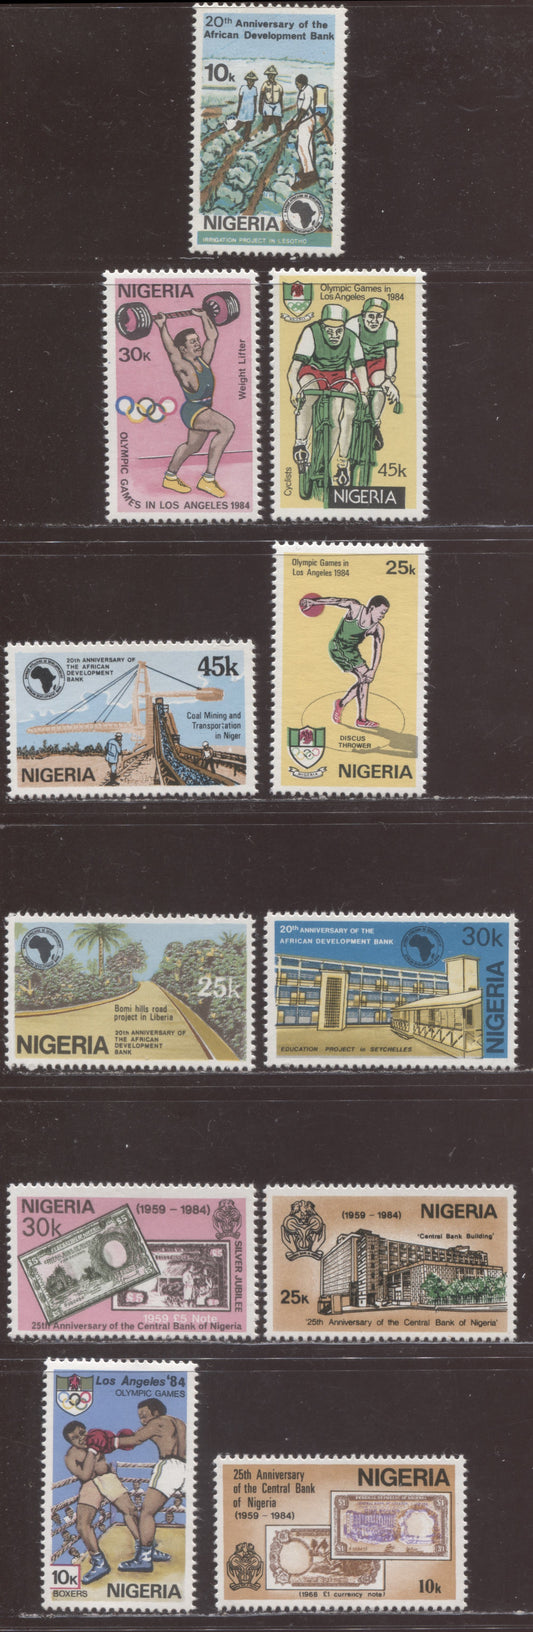 Nigeria SC#451-461 1984 Central Bank - African Development Bank, 11 VFNH Singles, Click on Listing to See ALL Pictures, 2017 Scott Cat. $6.2 USD